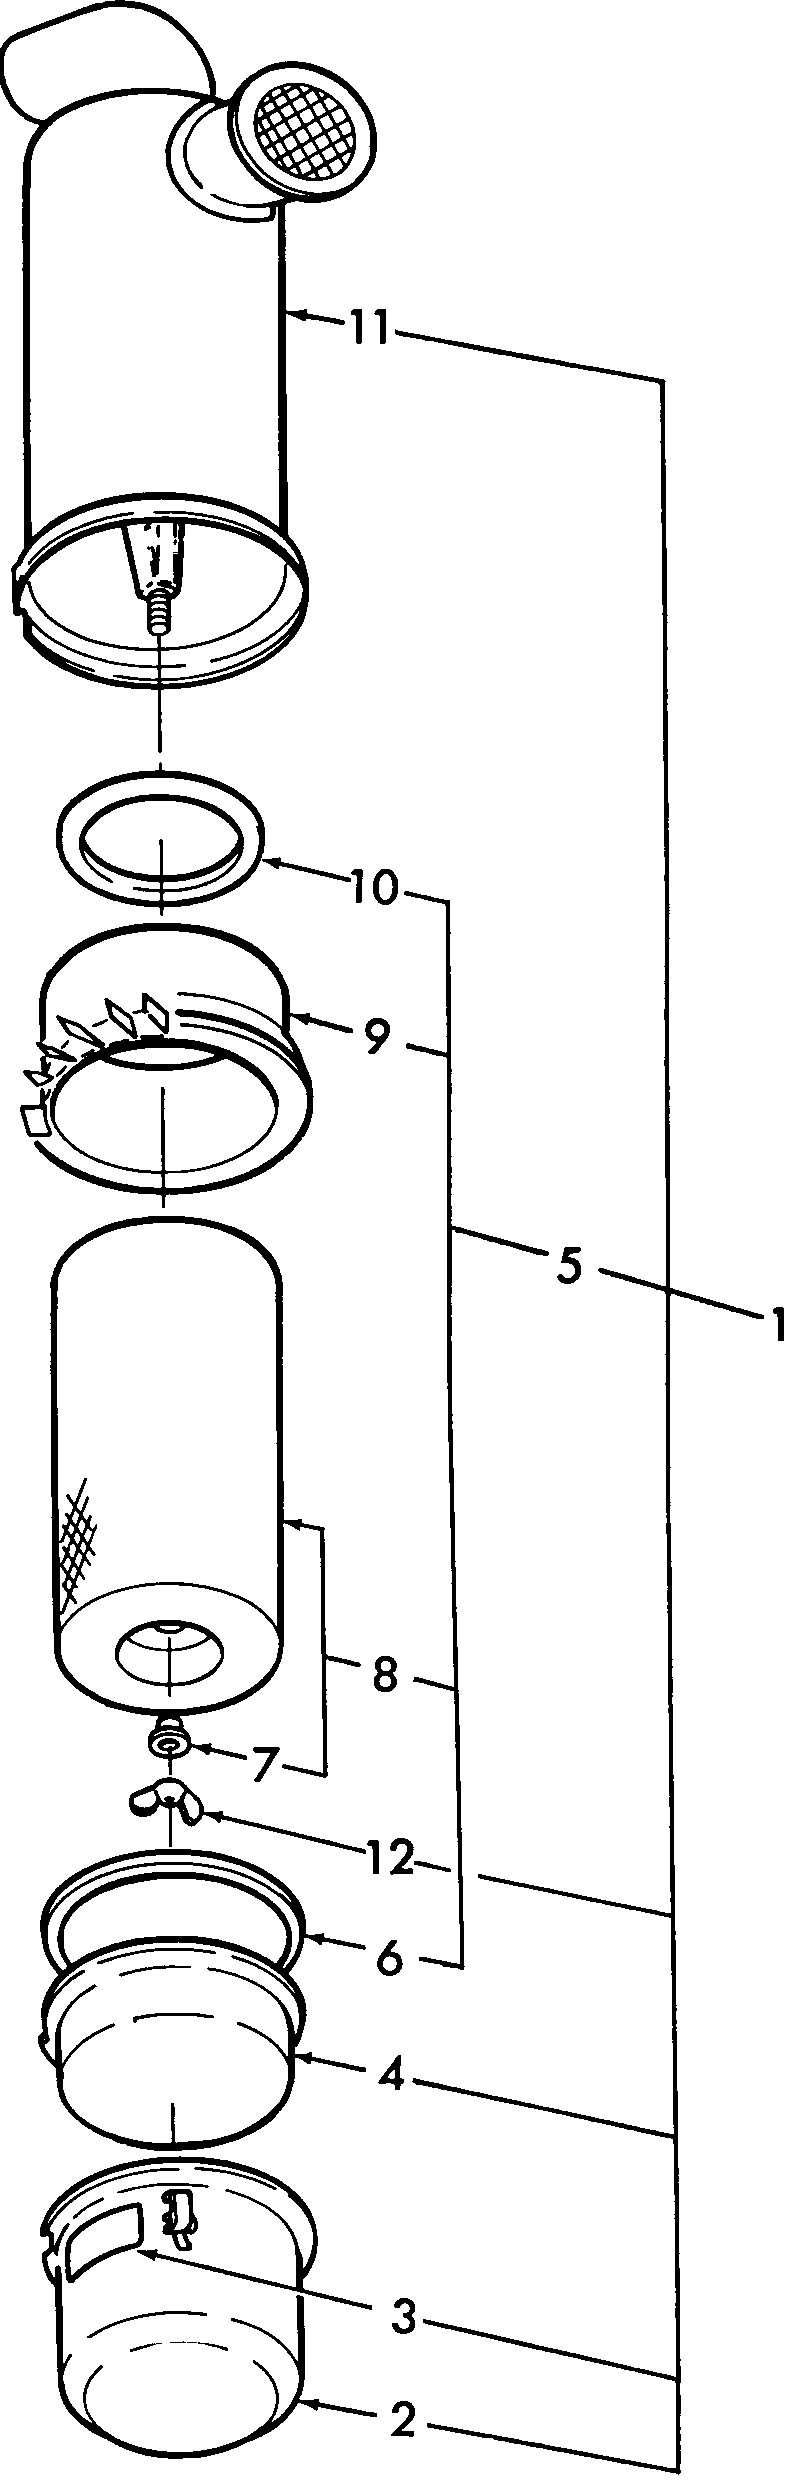 09C02 AIR CLEANER ASSEMBLY,  DETAILS